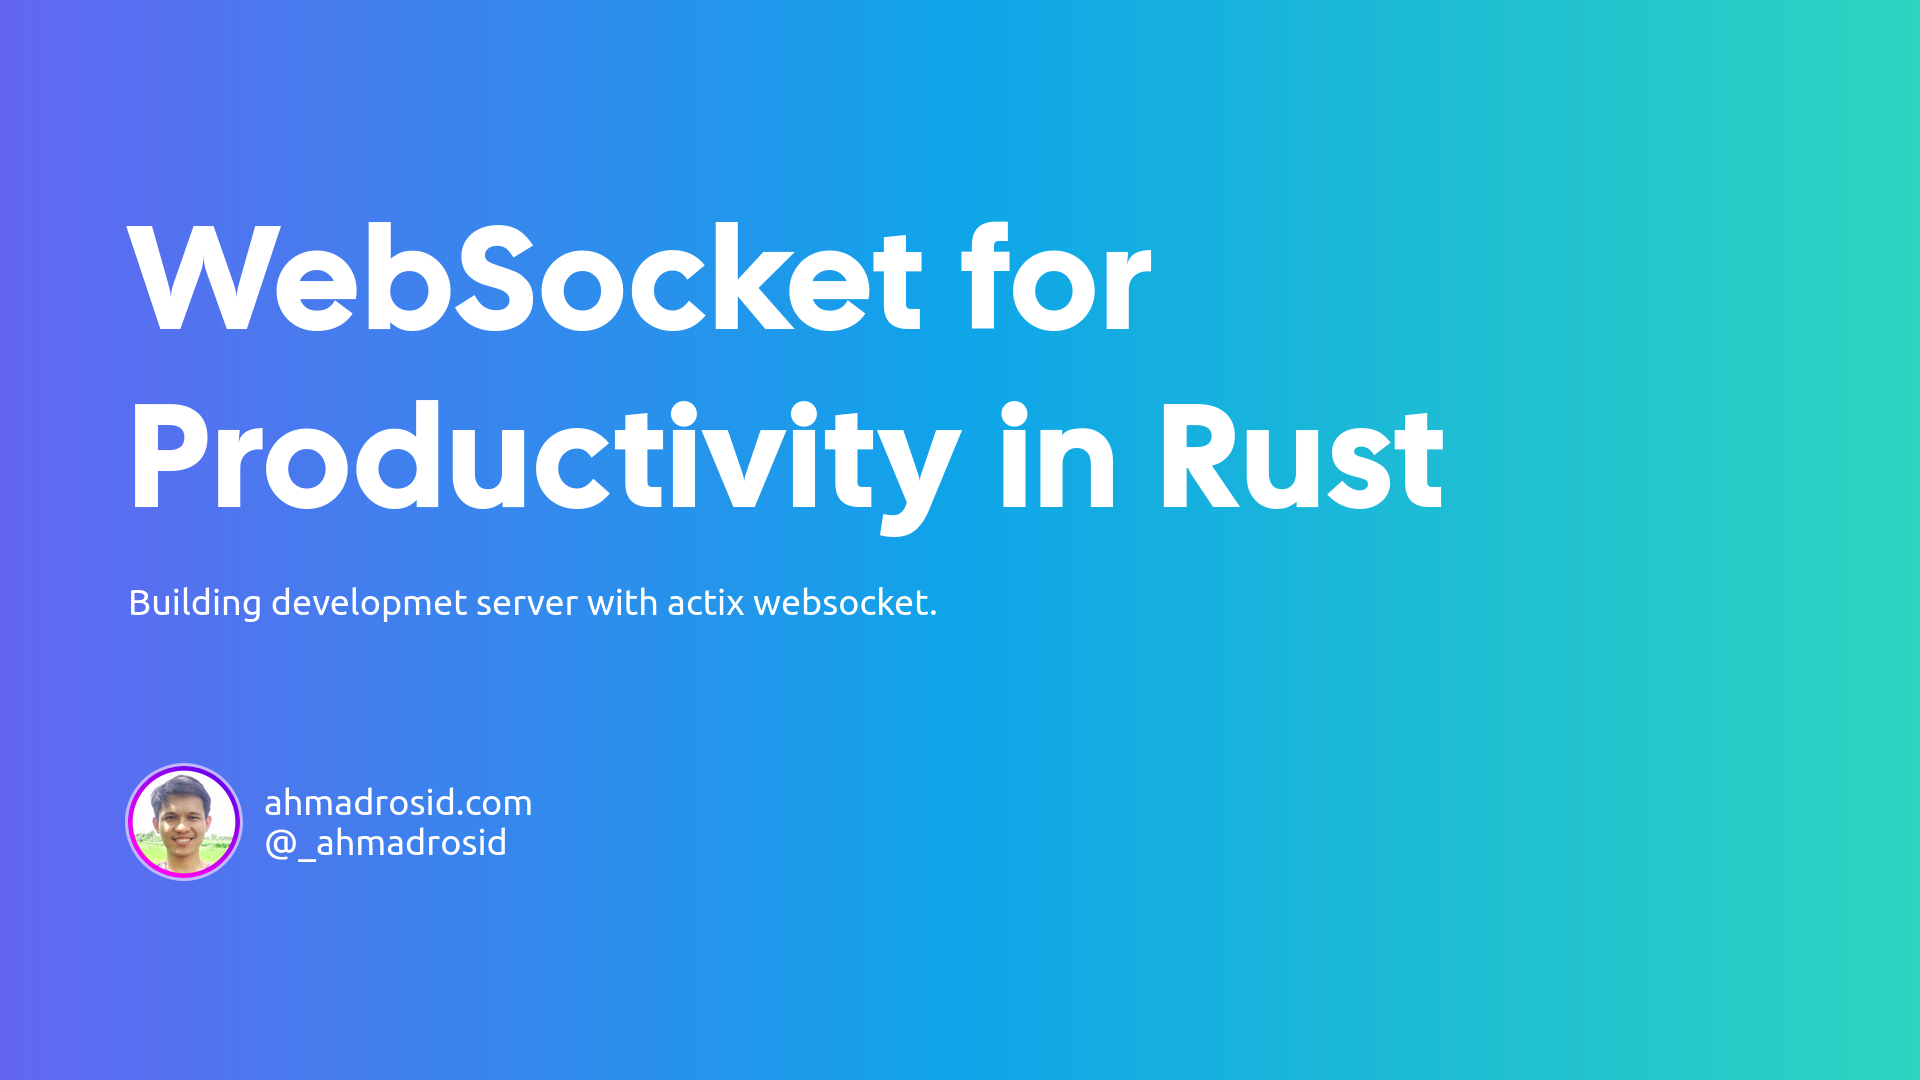 Web Socket for Productivity in Rust